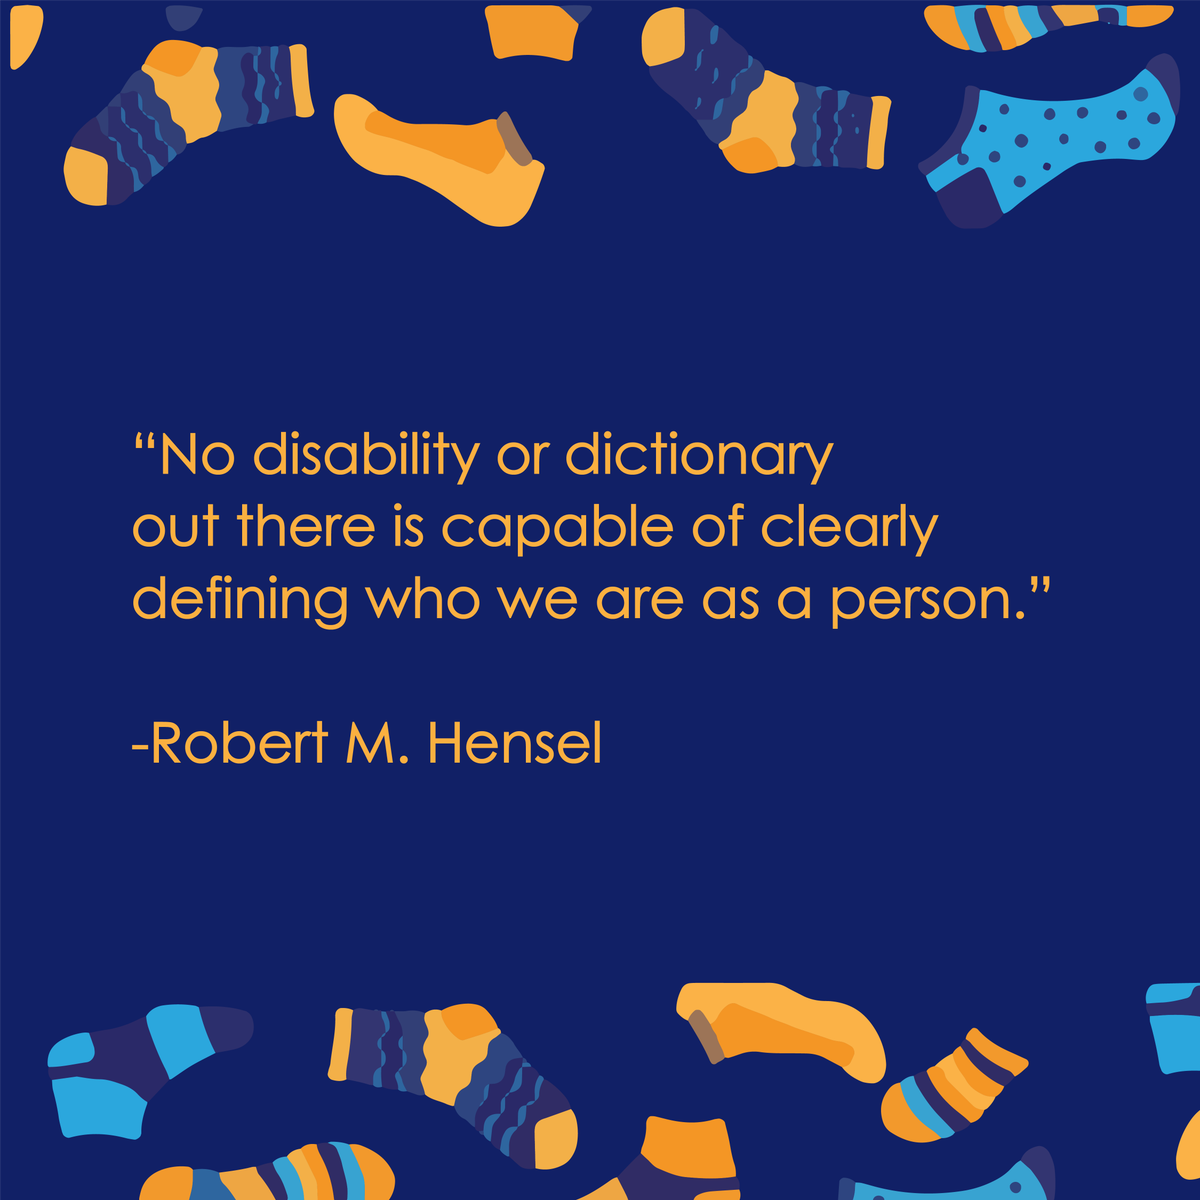 “No disability or dictionary out there is capable of clearly defining who we are as a person.” 

-Robert M. Hensel

#WorldDownSyndromeDay #downsyndrome
#worldwithoutdowns #lotsofsocks #rockyoursocks #socks #diveristy #ChromosomallyEnhanced
#WSDS #wdsd19 #quote #love #life